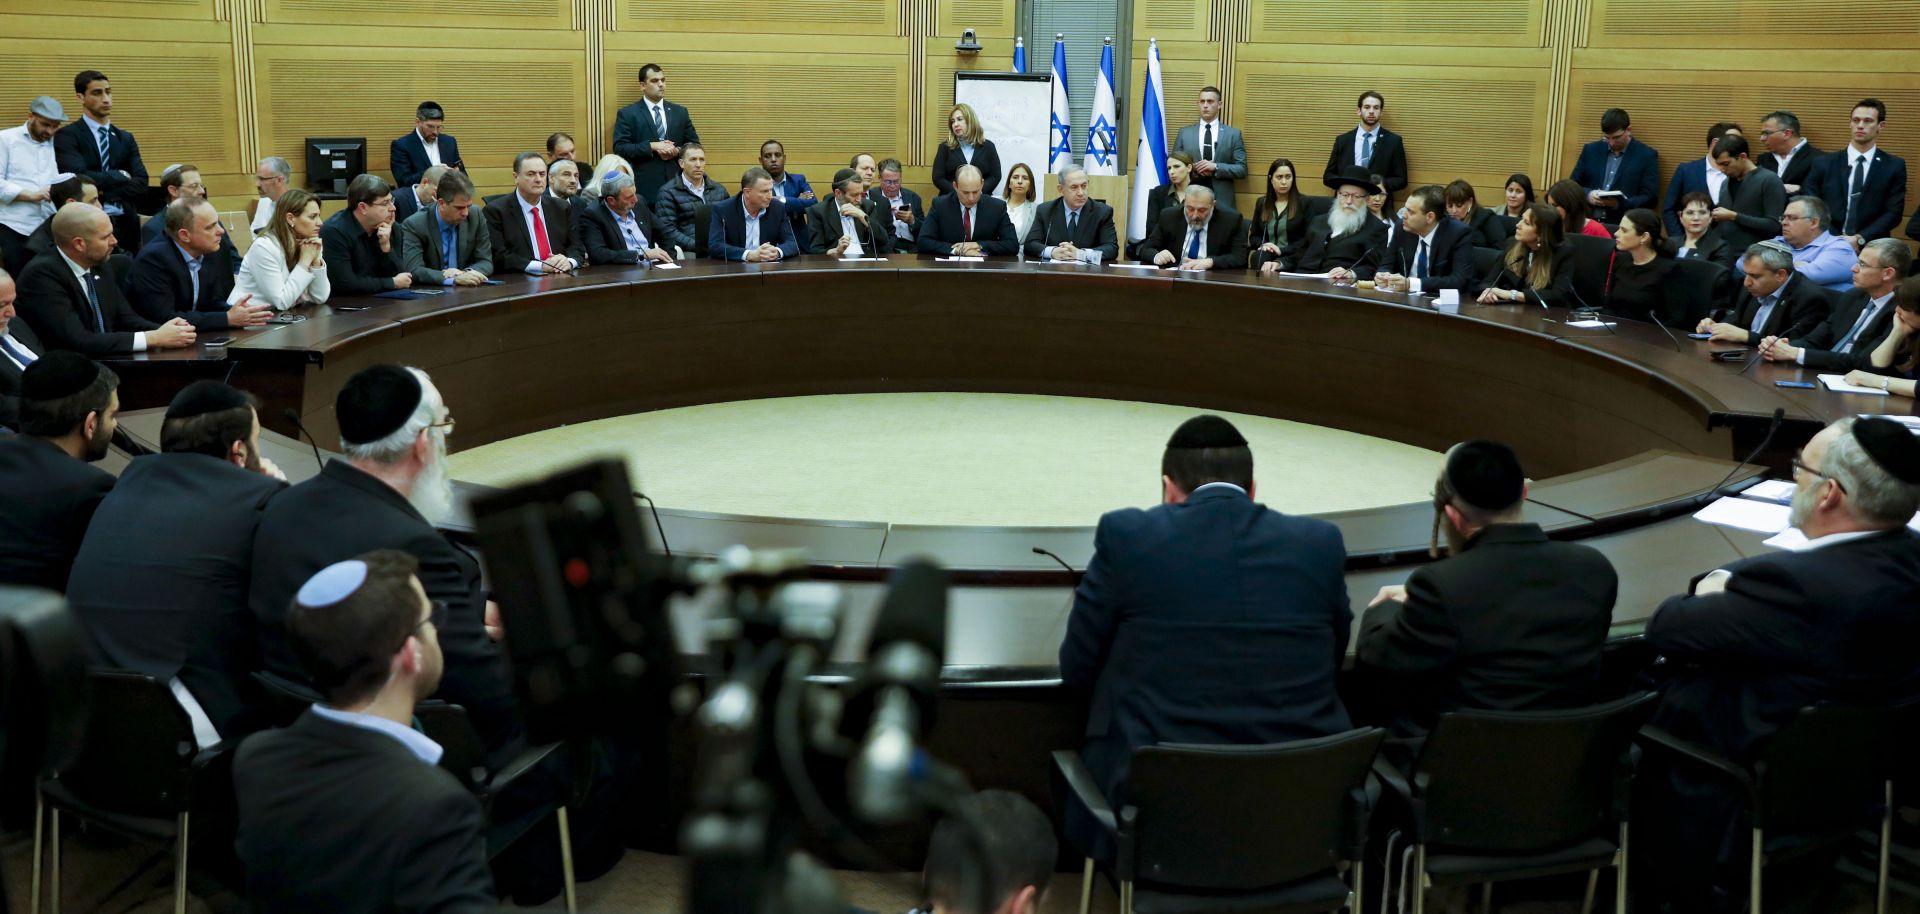 Israel's right-wing block meets at the Knesset in Jerusalem on March 4, 2020.